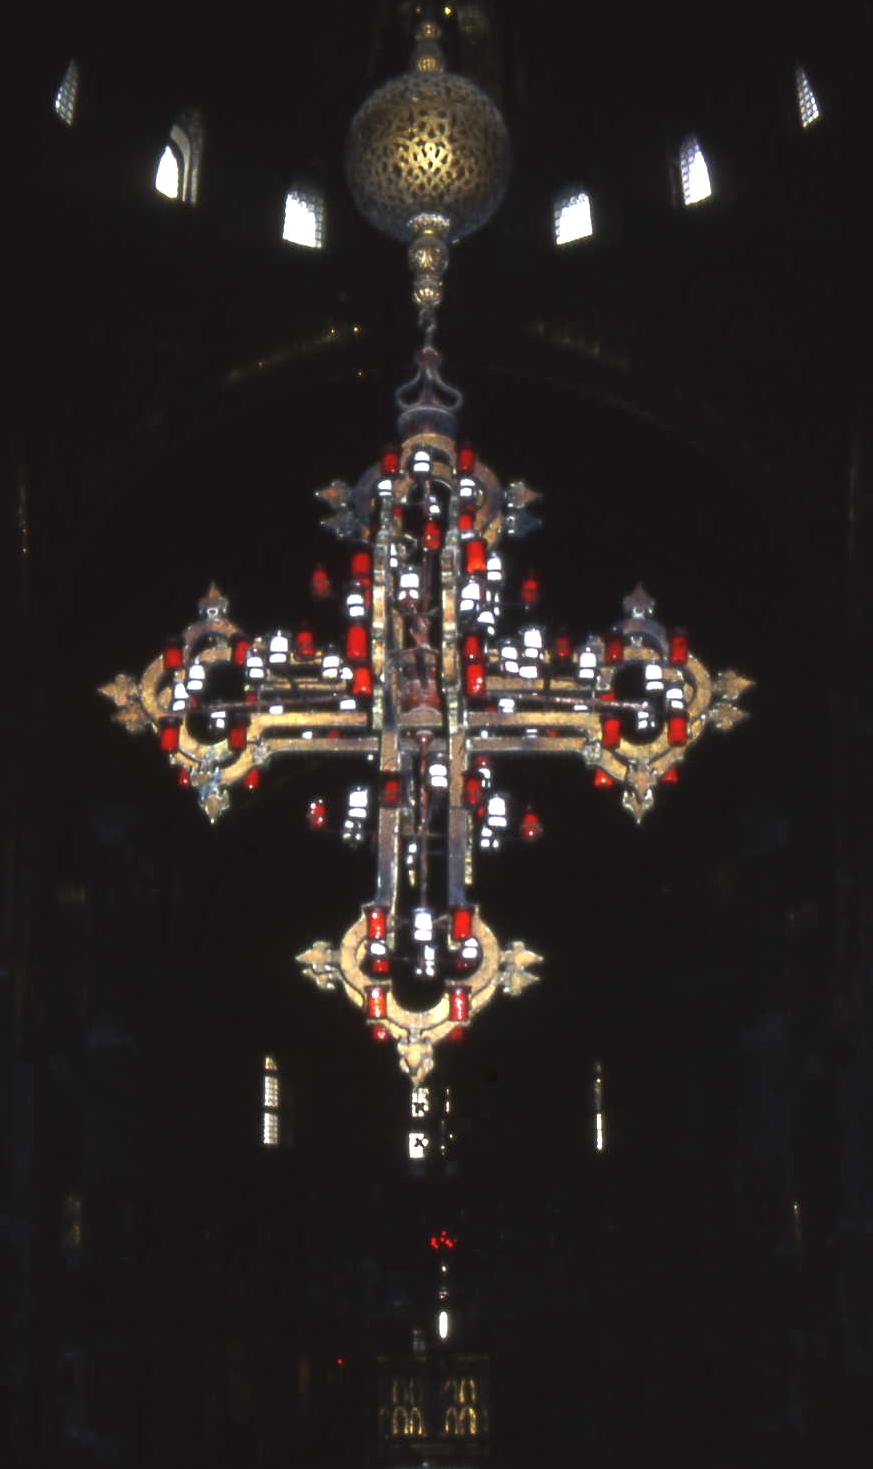 Special lamp over altar